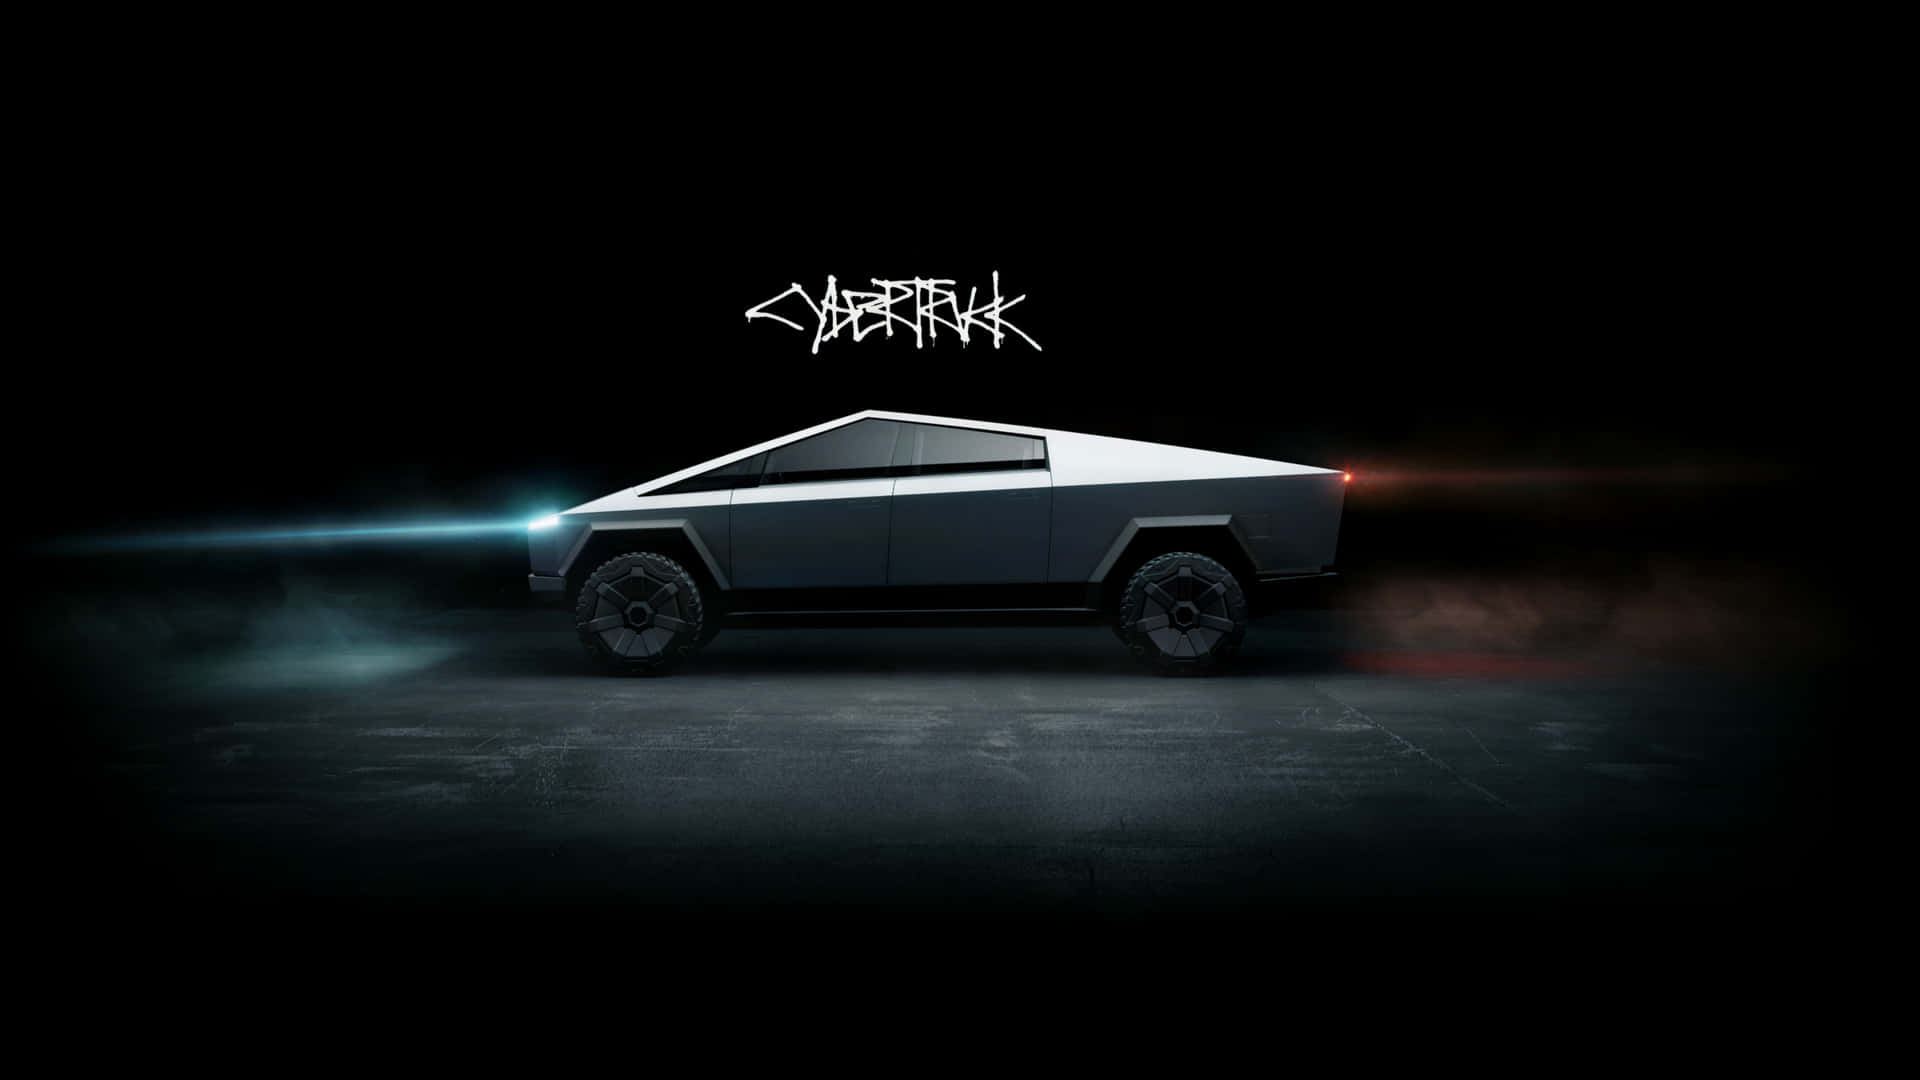 Get Ready To Be Inspired By Tesla's Unconventional Cybertruck